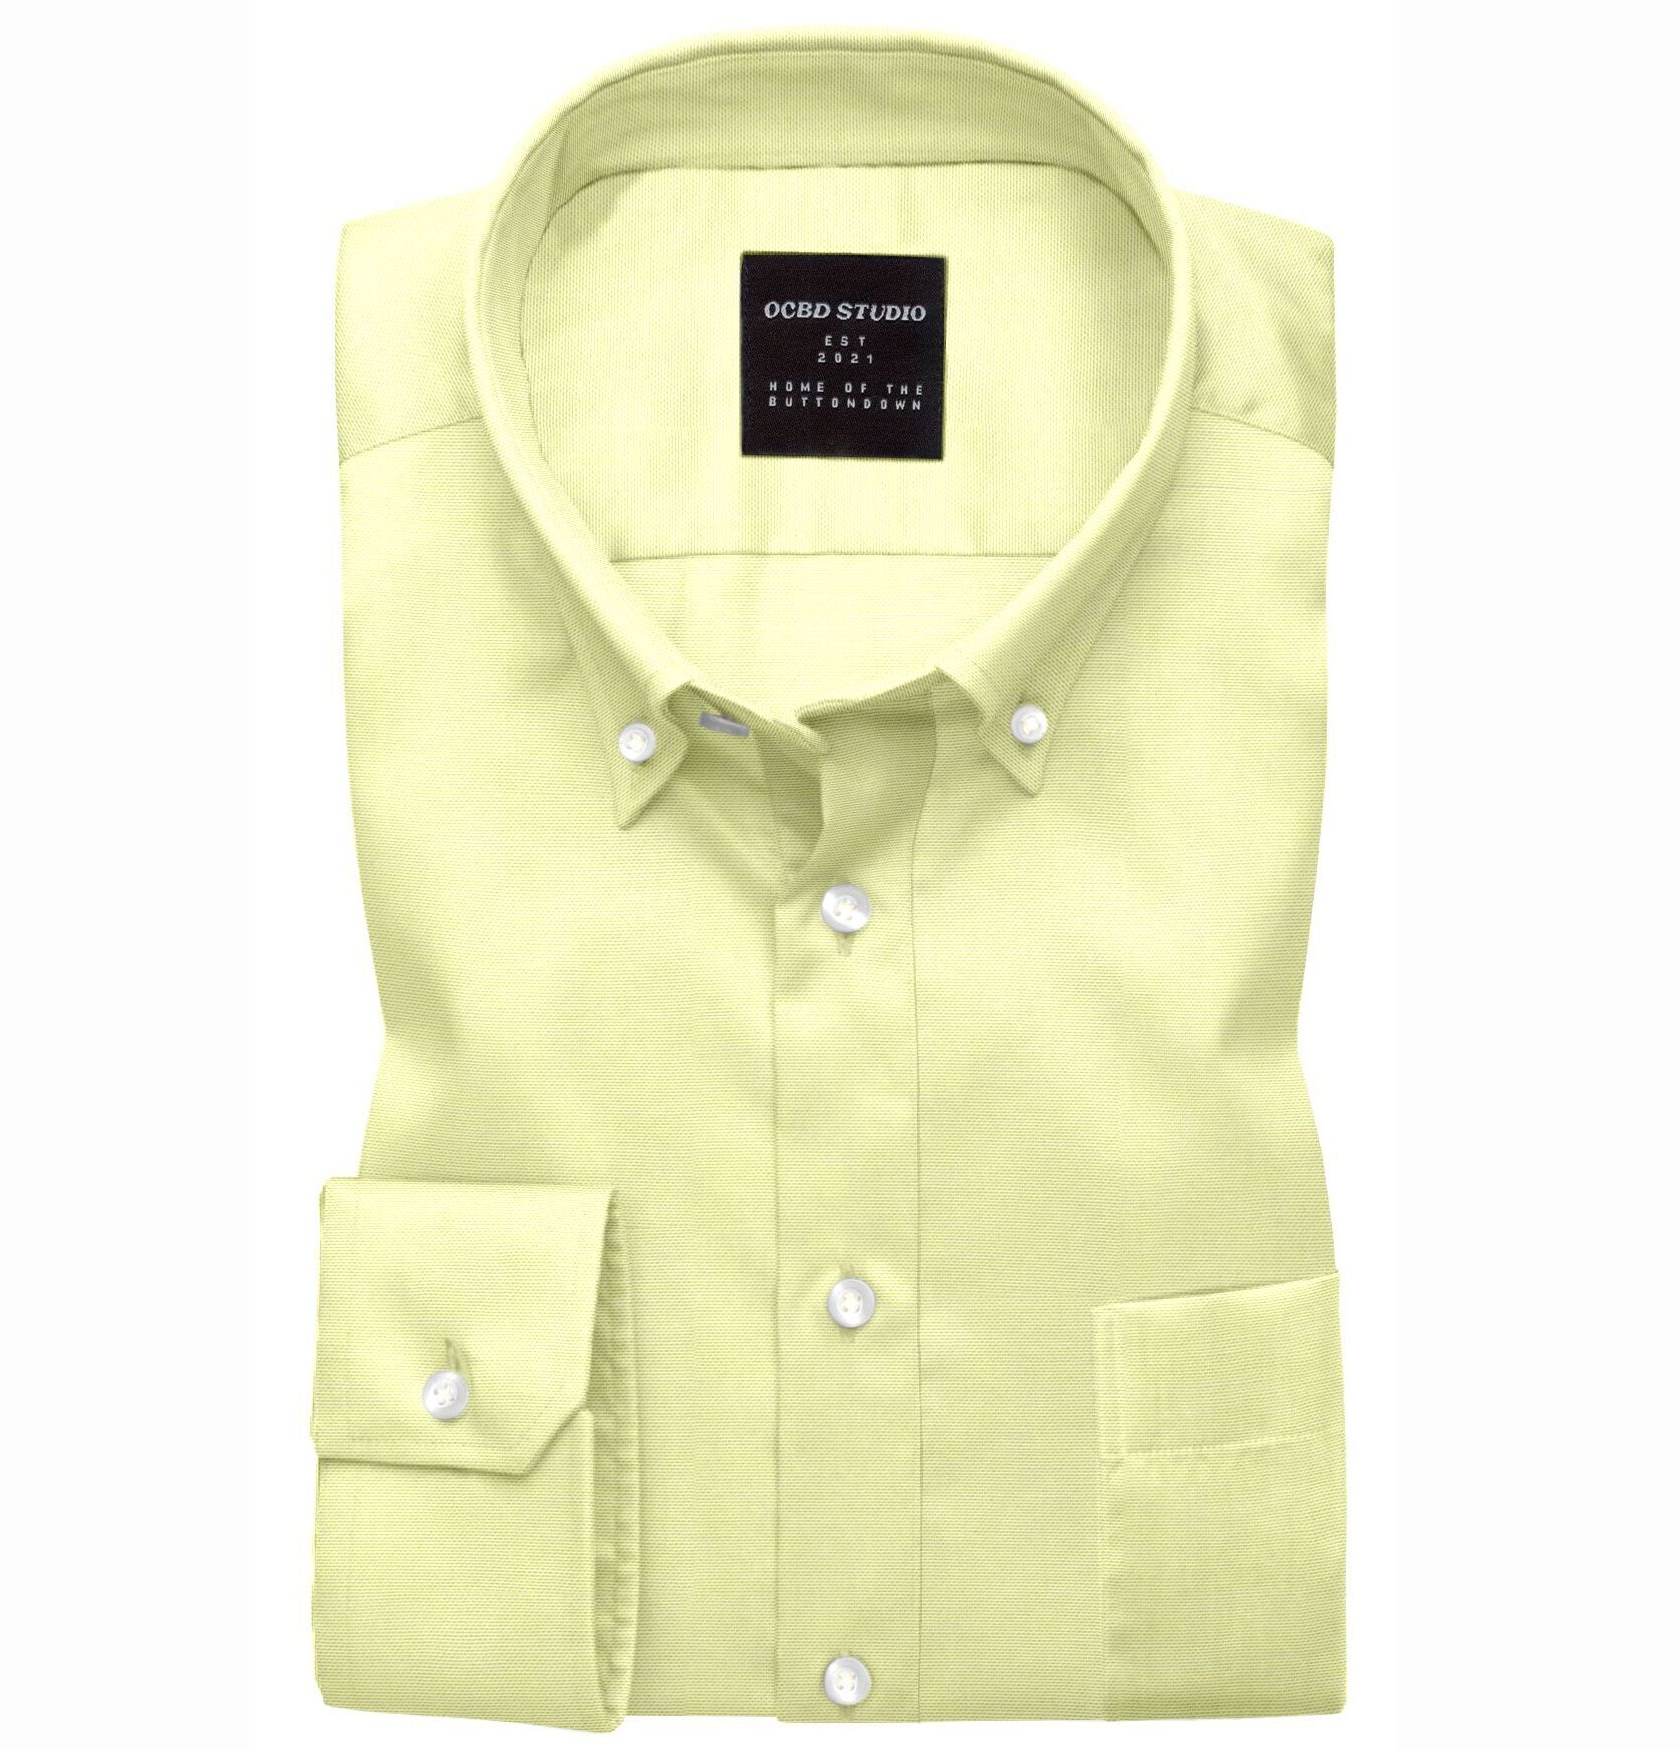 Buy AE Classic Fit Oxford Button-Up Shirt online